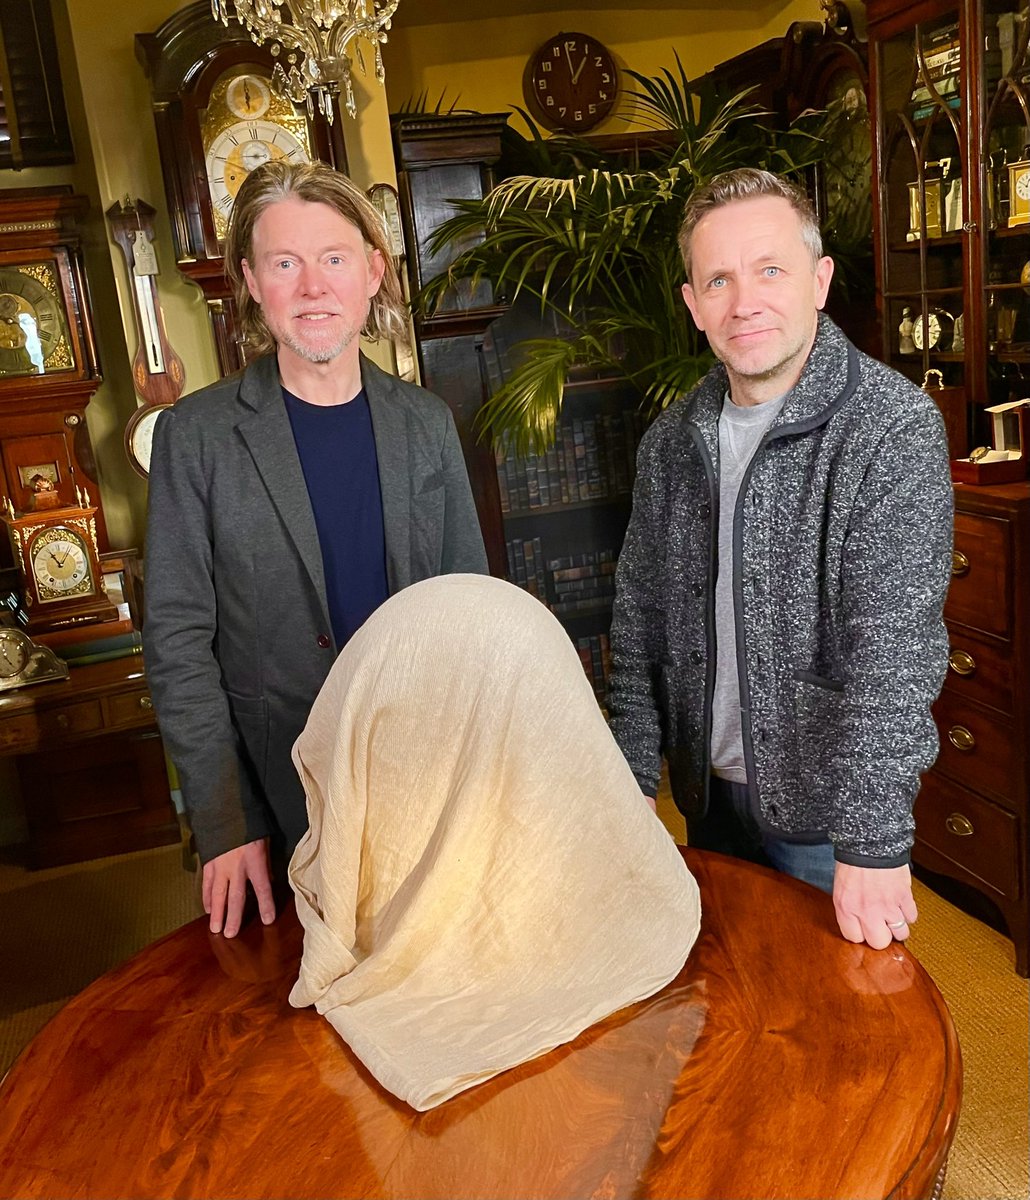 Another item finished for series six of #salvagehunterstherestorers. Under the sheet is an incredible piece of work from Paul Williams, one of the country’s top horologists. 20 brand new episodes covering 60 items, coming to the small screen later this spring. @discoveryplusUK